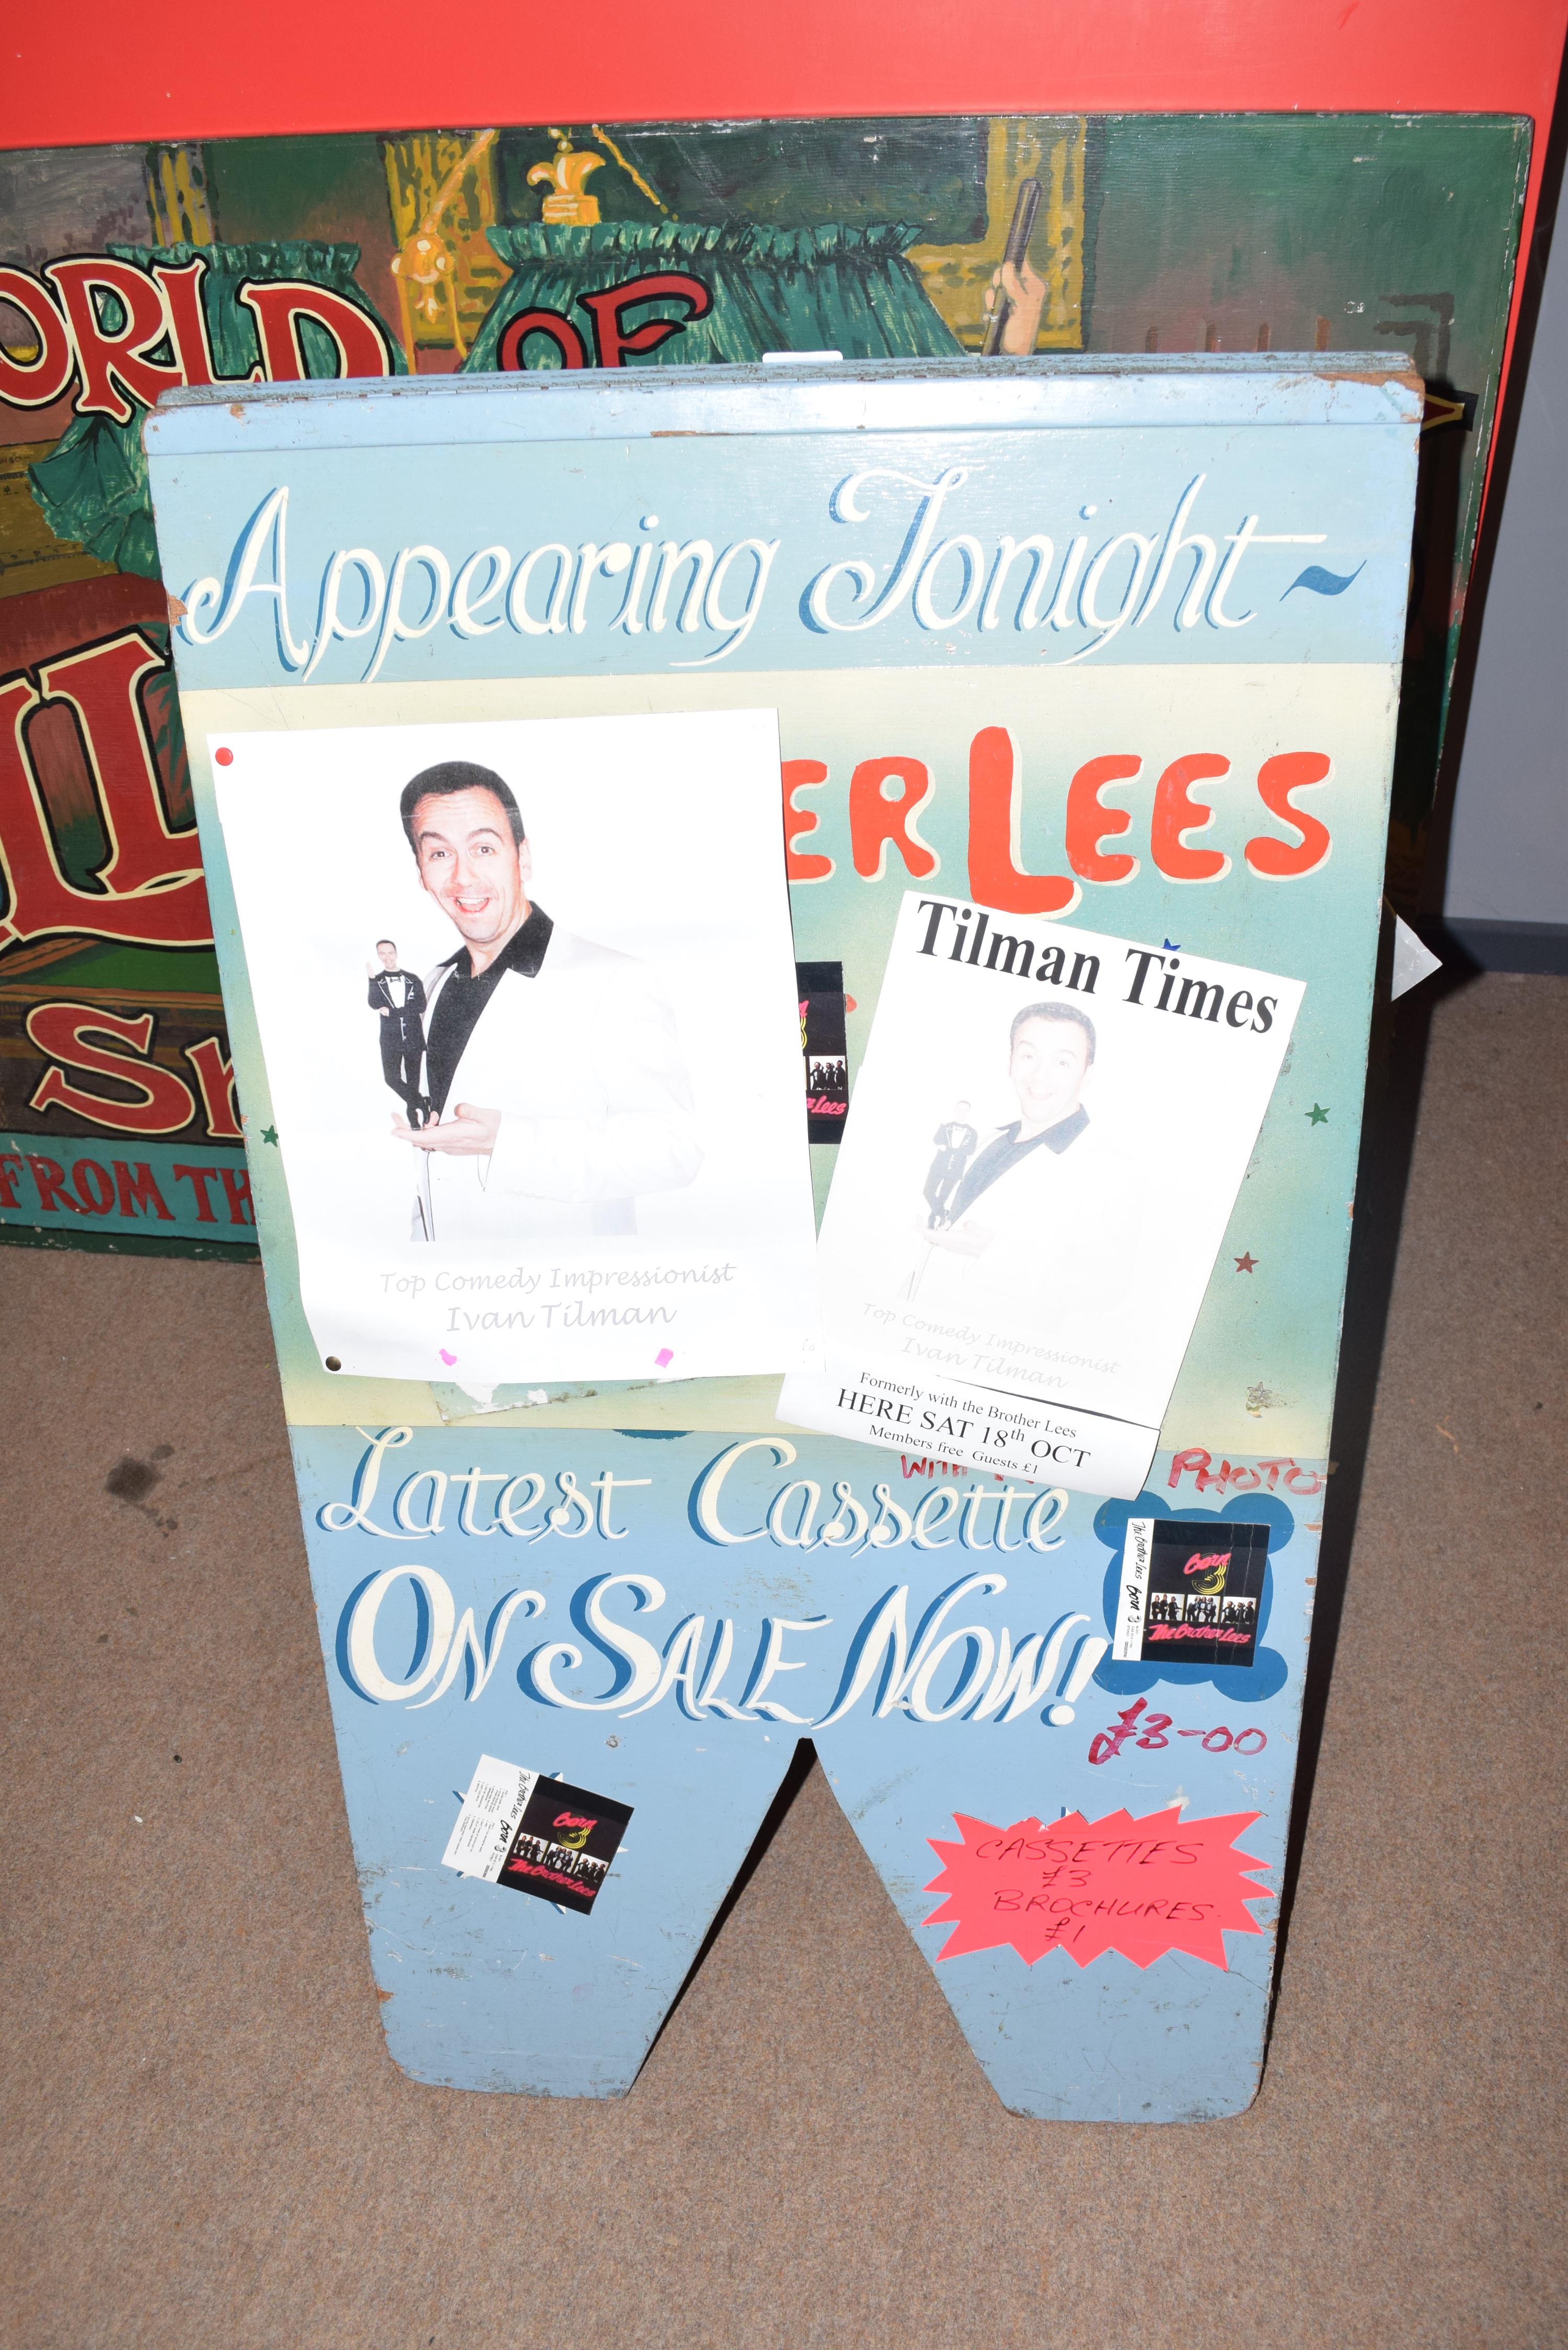 Folding advertising board marked 'Appearing tonight Brother Lees', 110cm high - Image 2 of 2